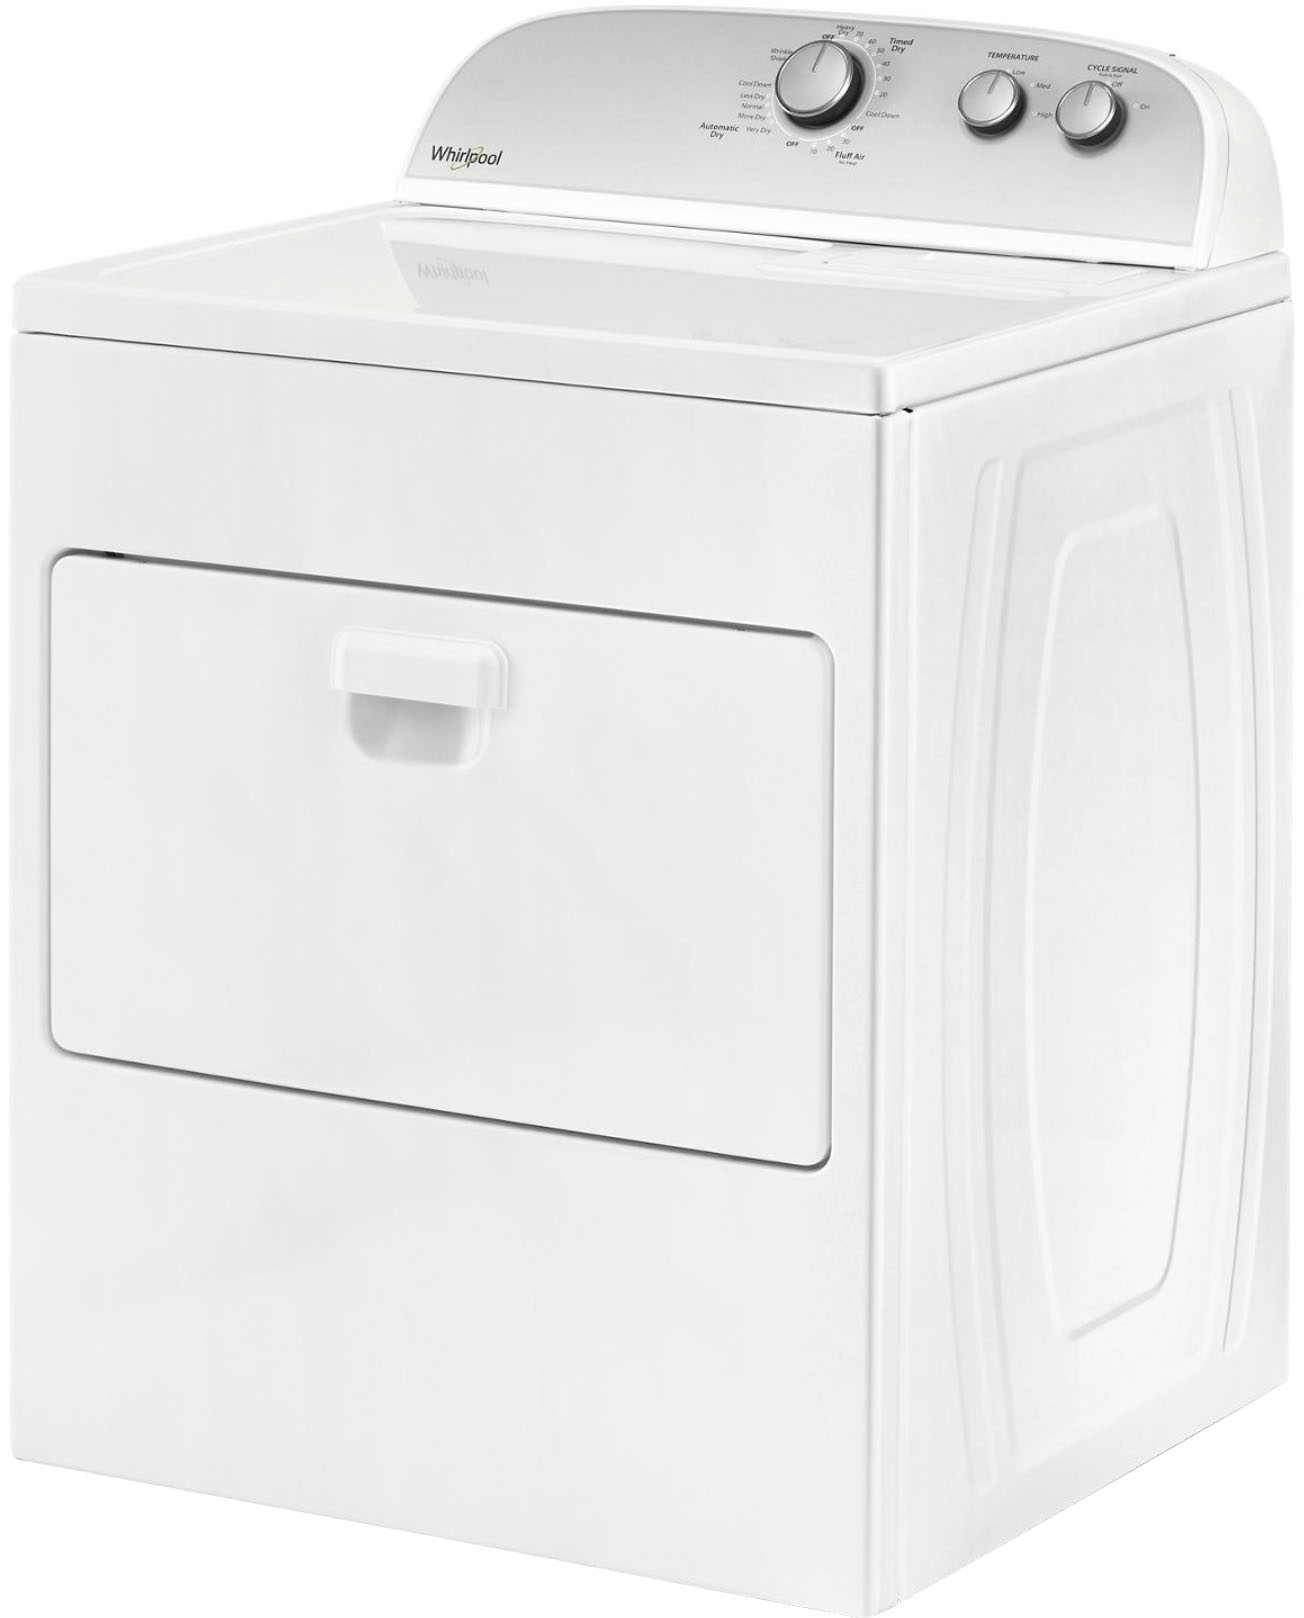 Angle View: Whirlpool - 7 Cu. Ft. Electric Dryer with AutoDry Drying System - White